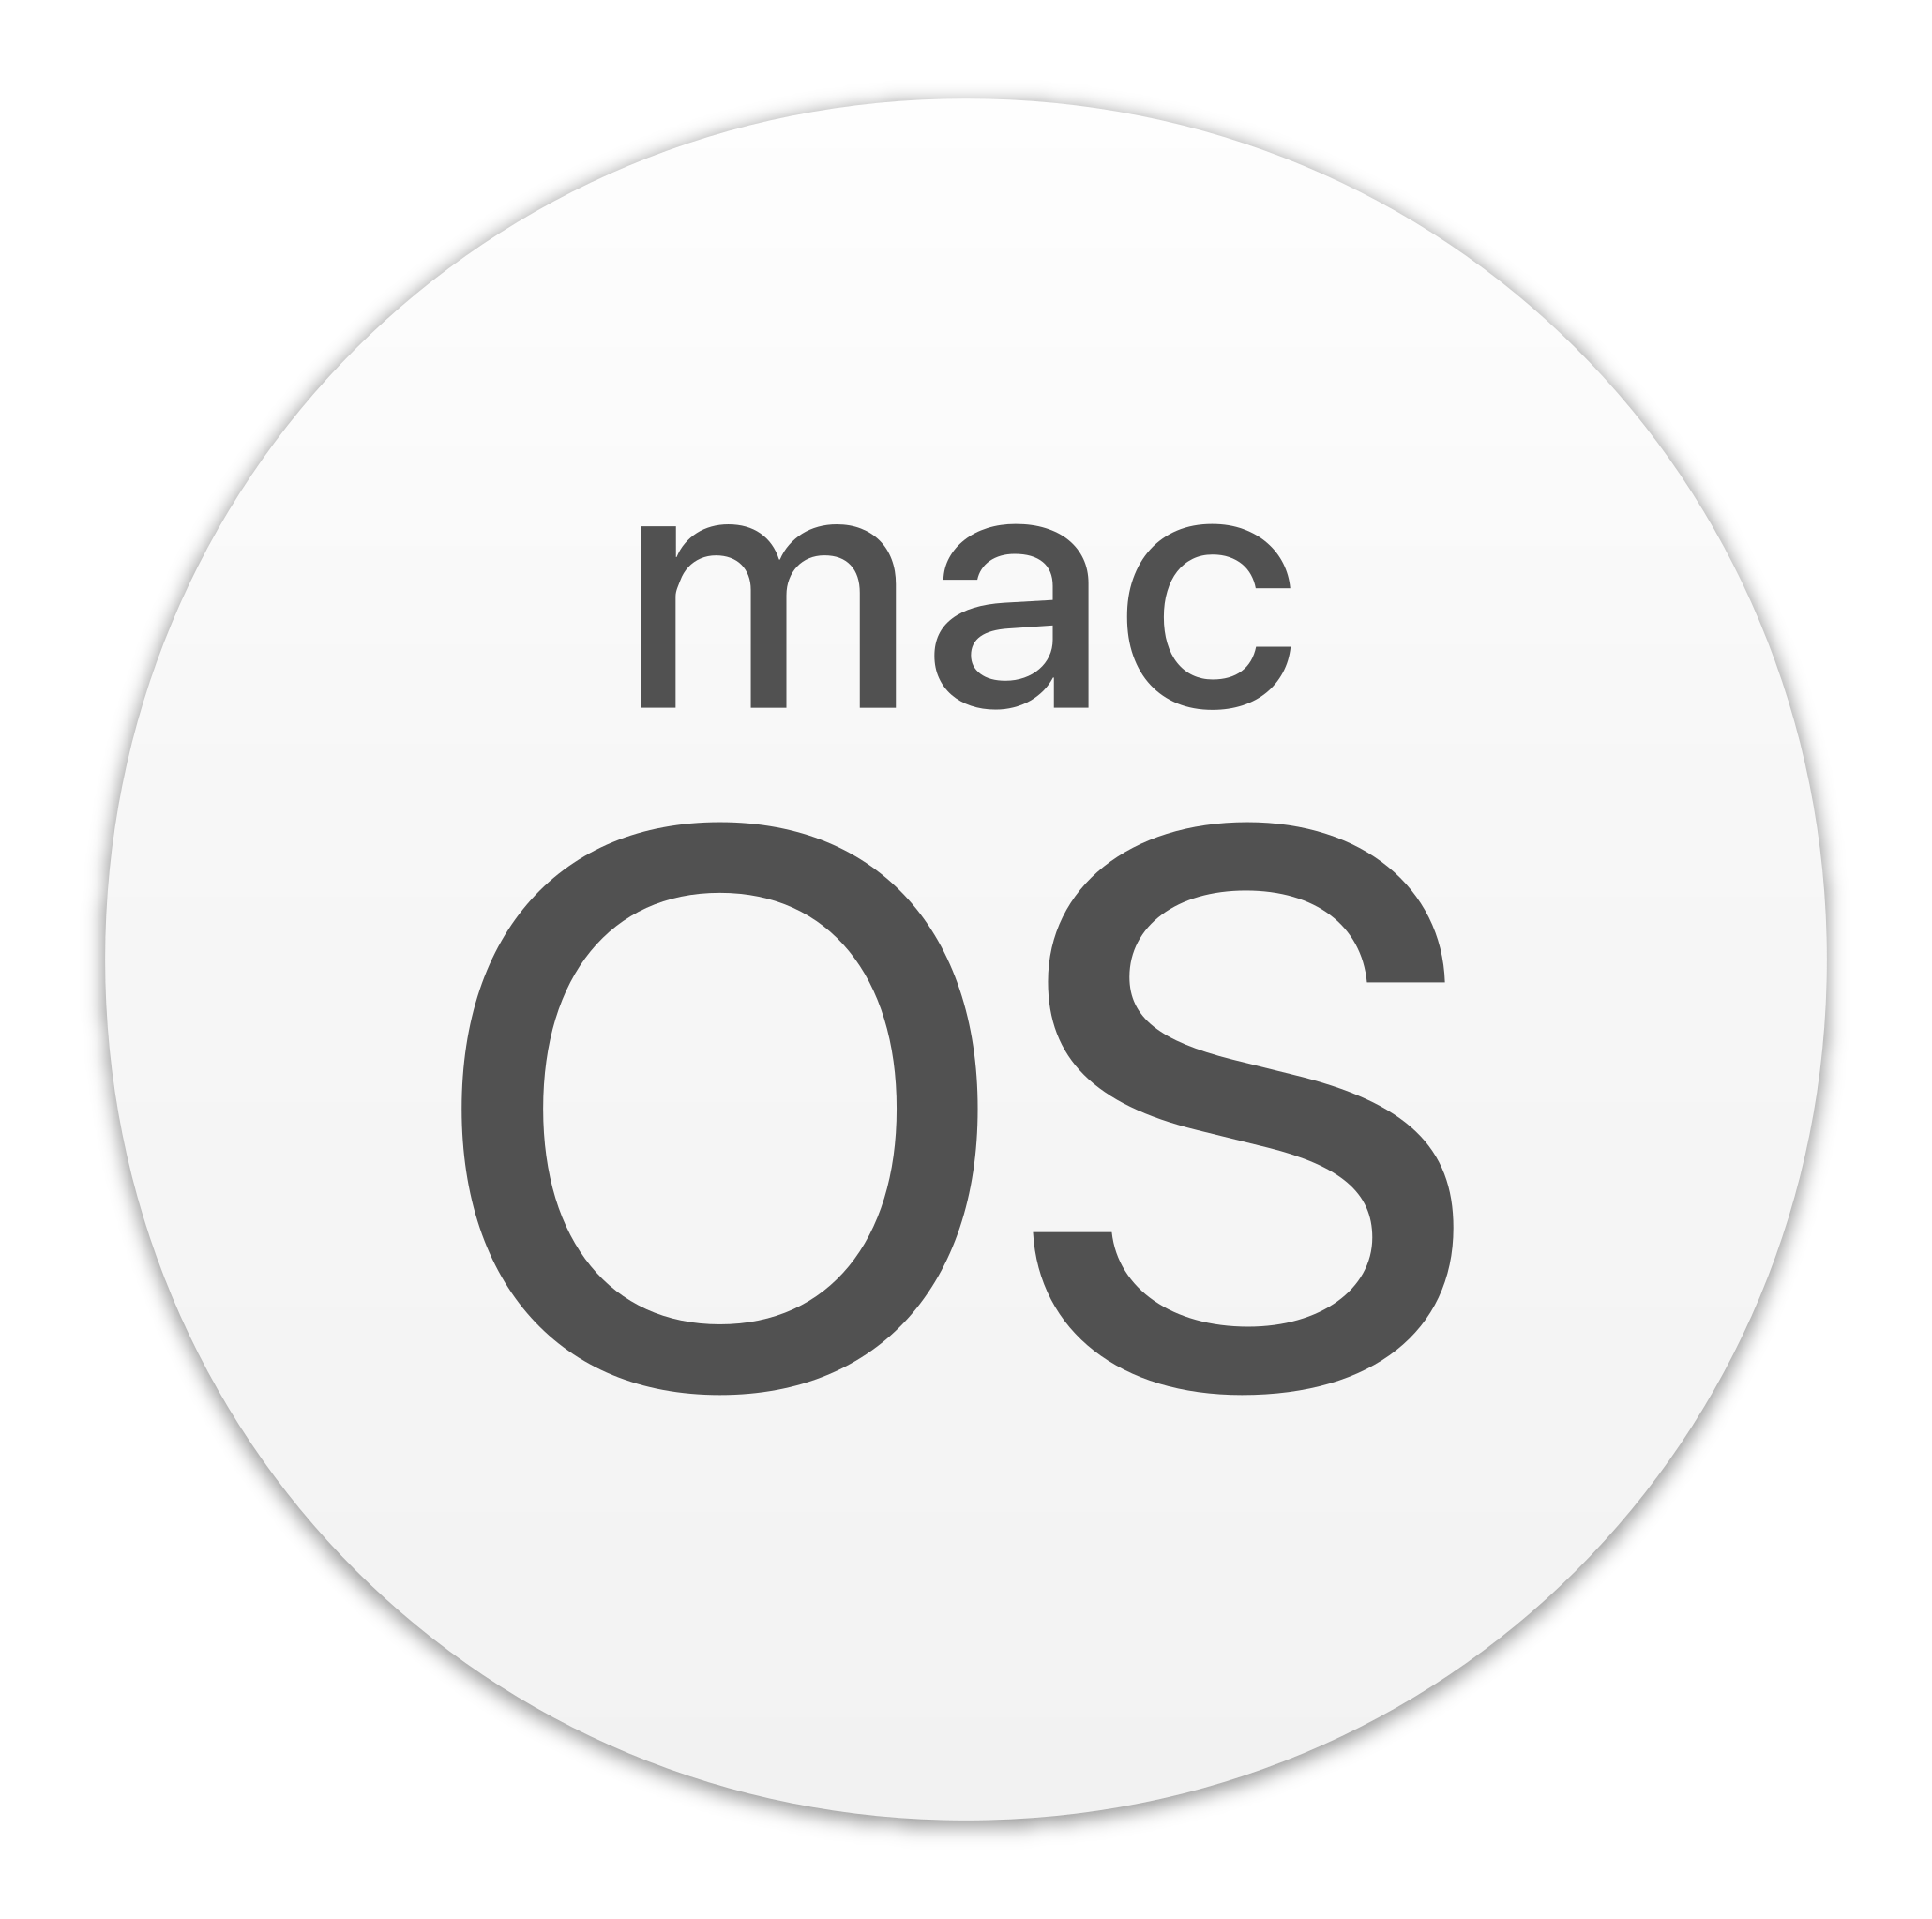 Download File Macos Logo 2017 Svg Wikimedia Commons